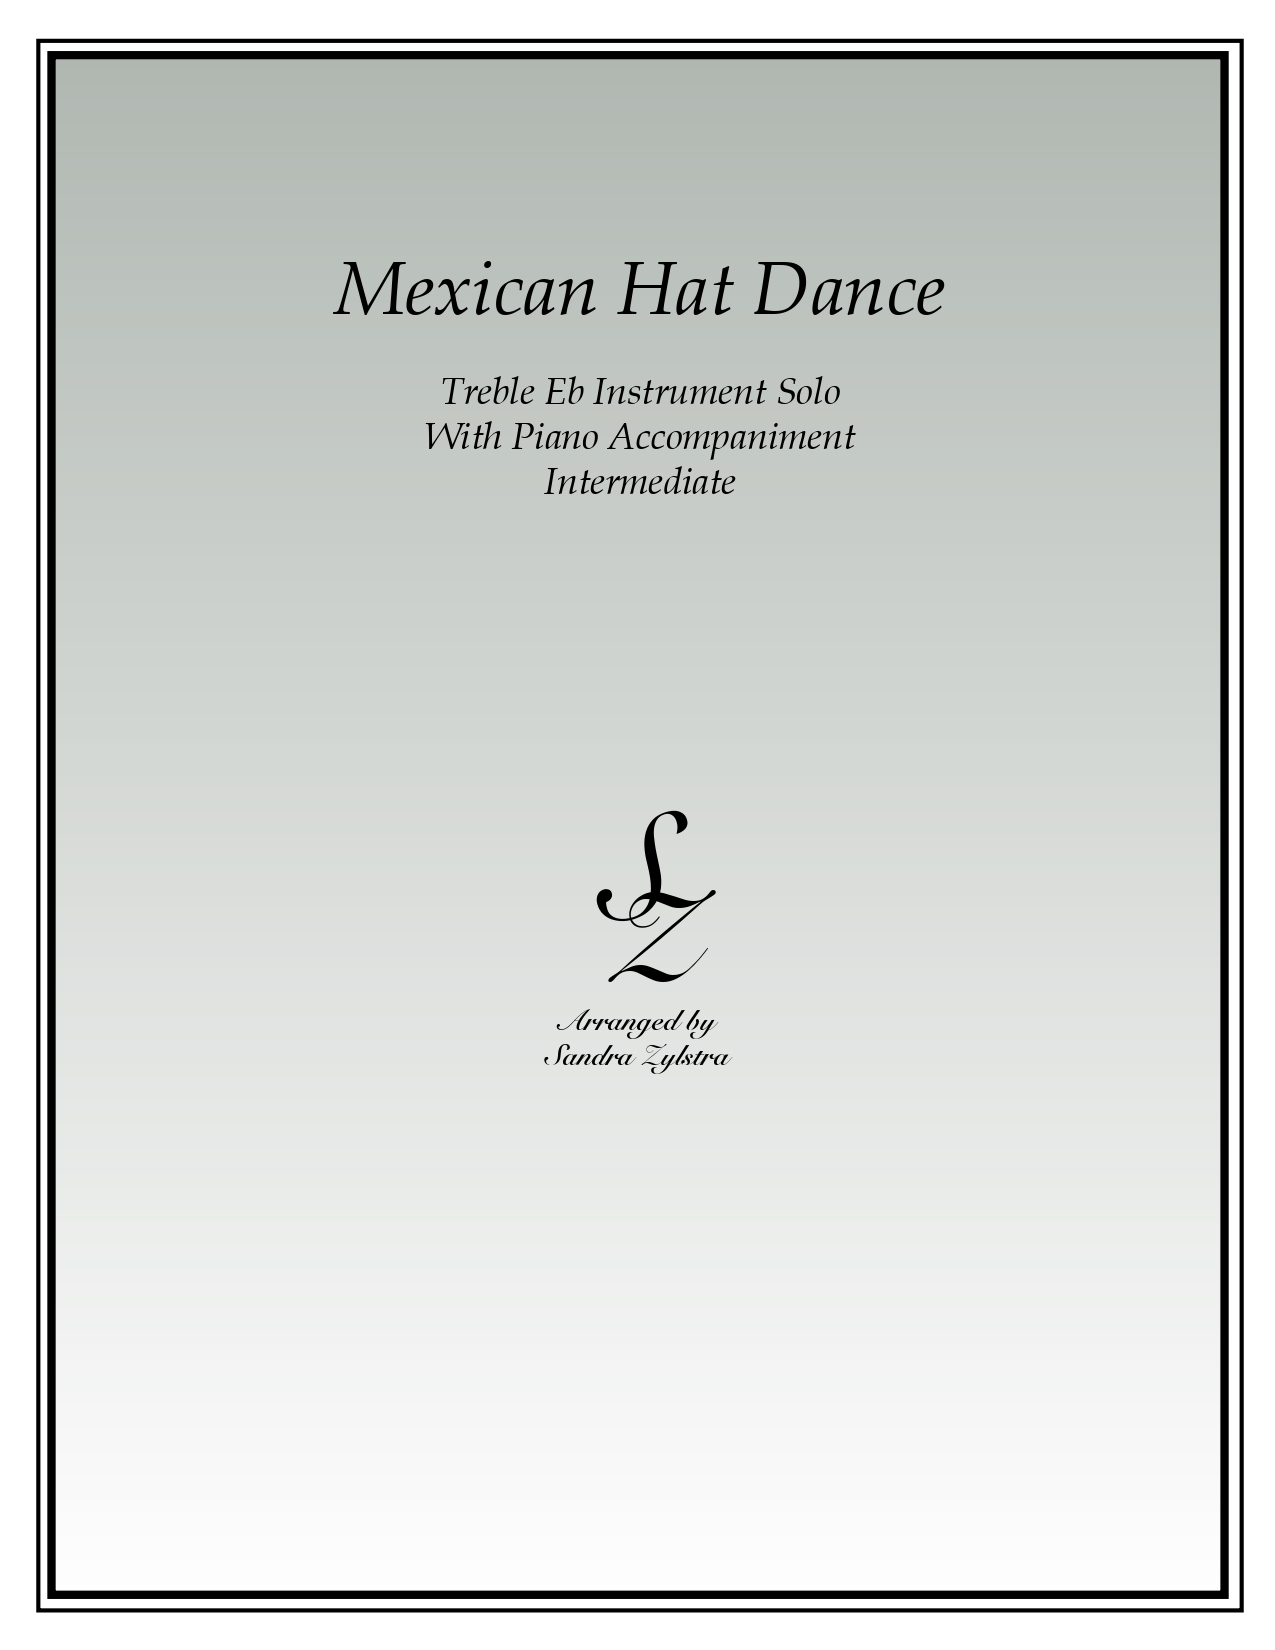 Mexican Hat Dance Eb instrument solo part cover page 00011